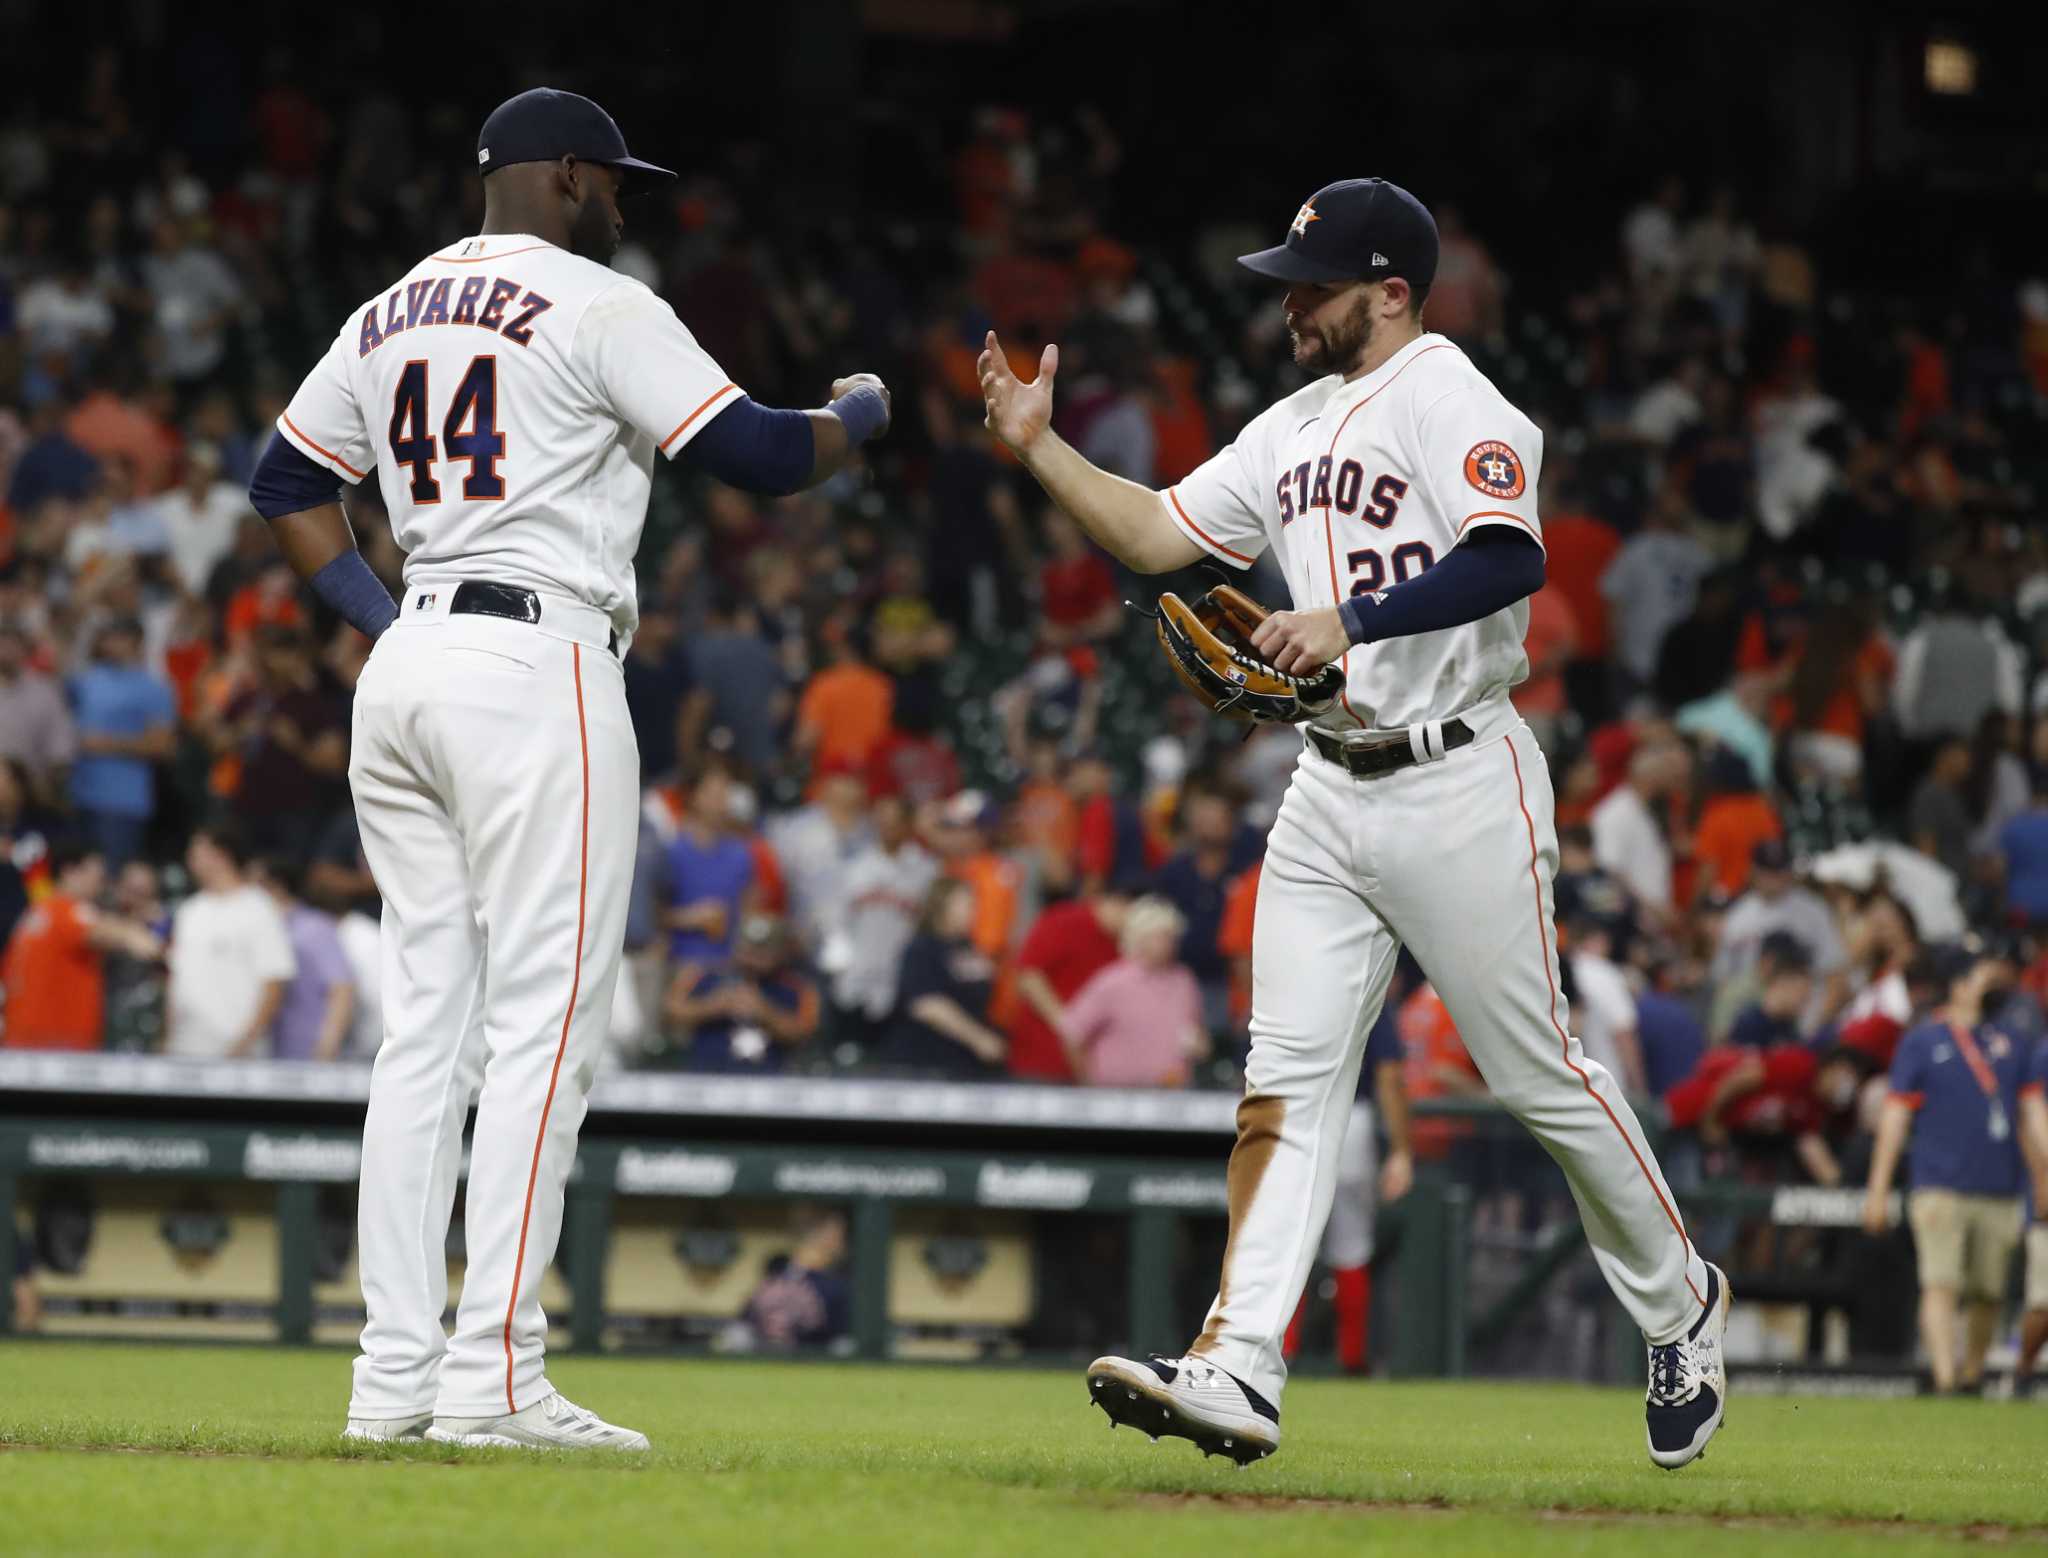 Garcia throws 7 solid innings, Astros beat Red Sox 5-1 - The San Diego  Union-Tribune